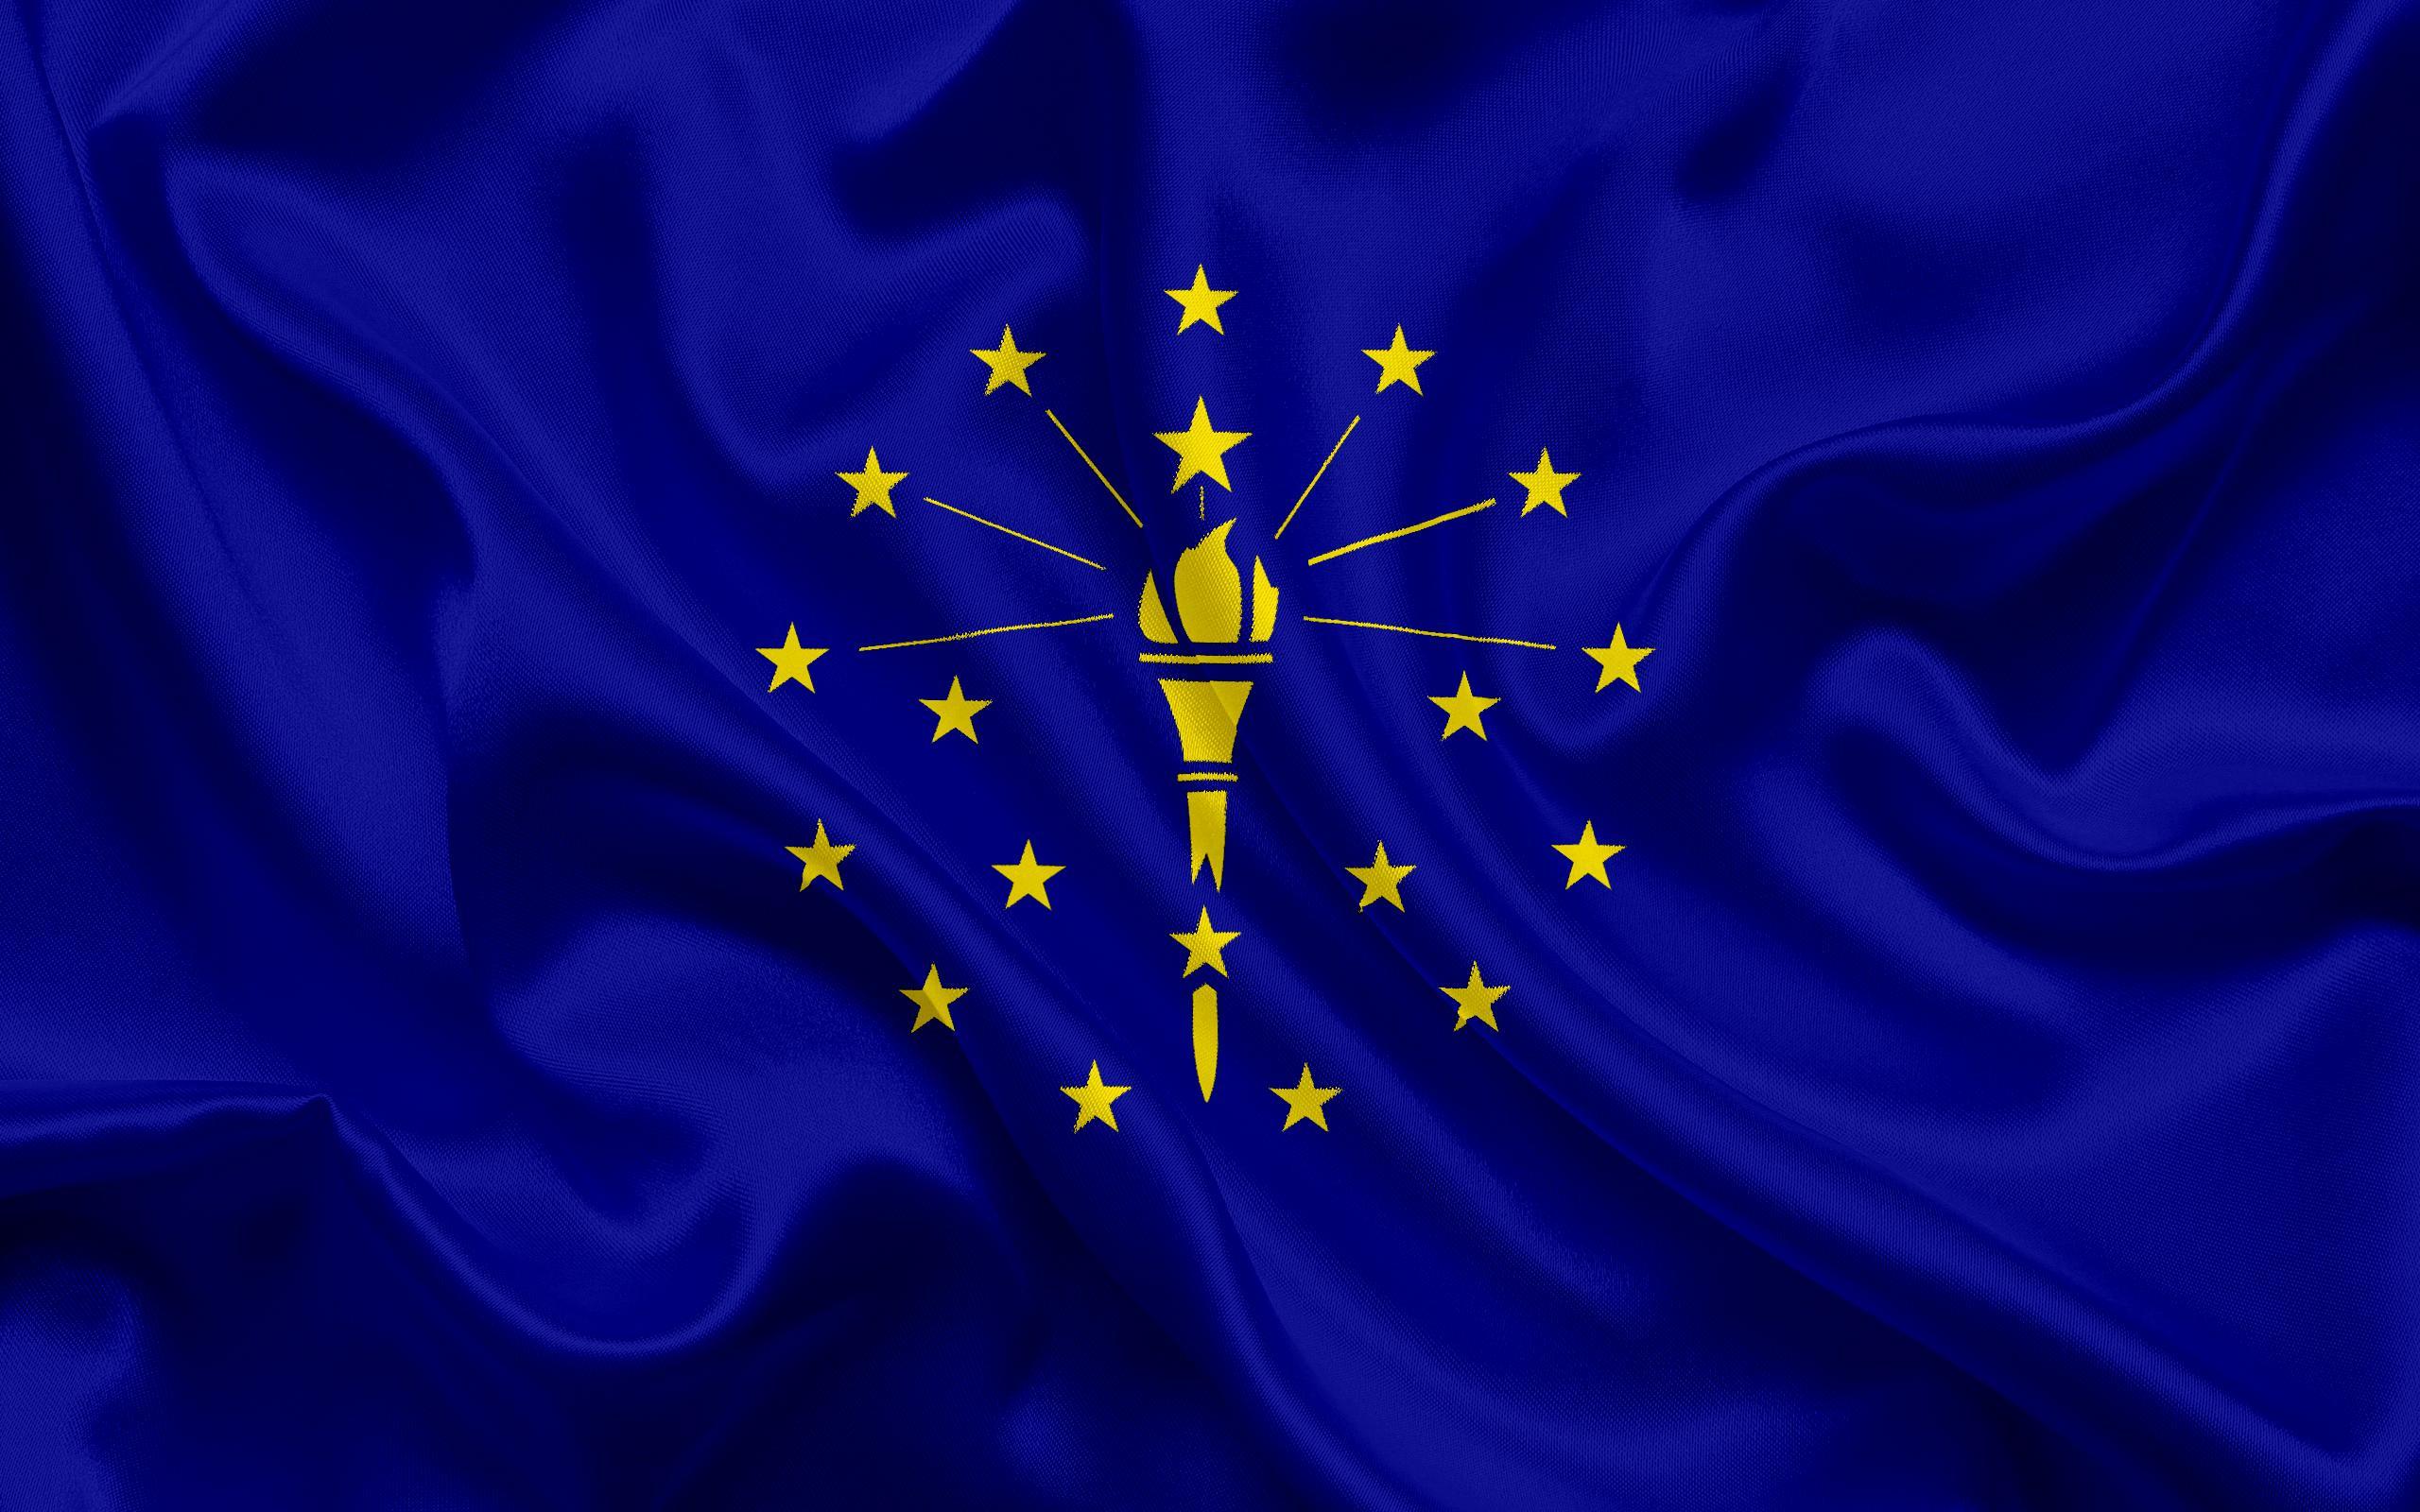 Download wallpaper Indiana Flag, flags of States, flag State